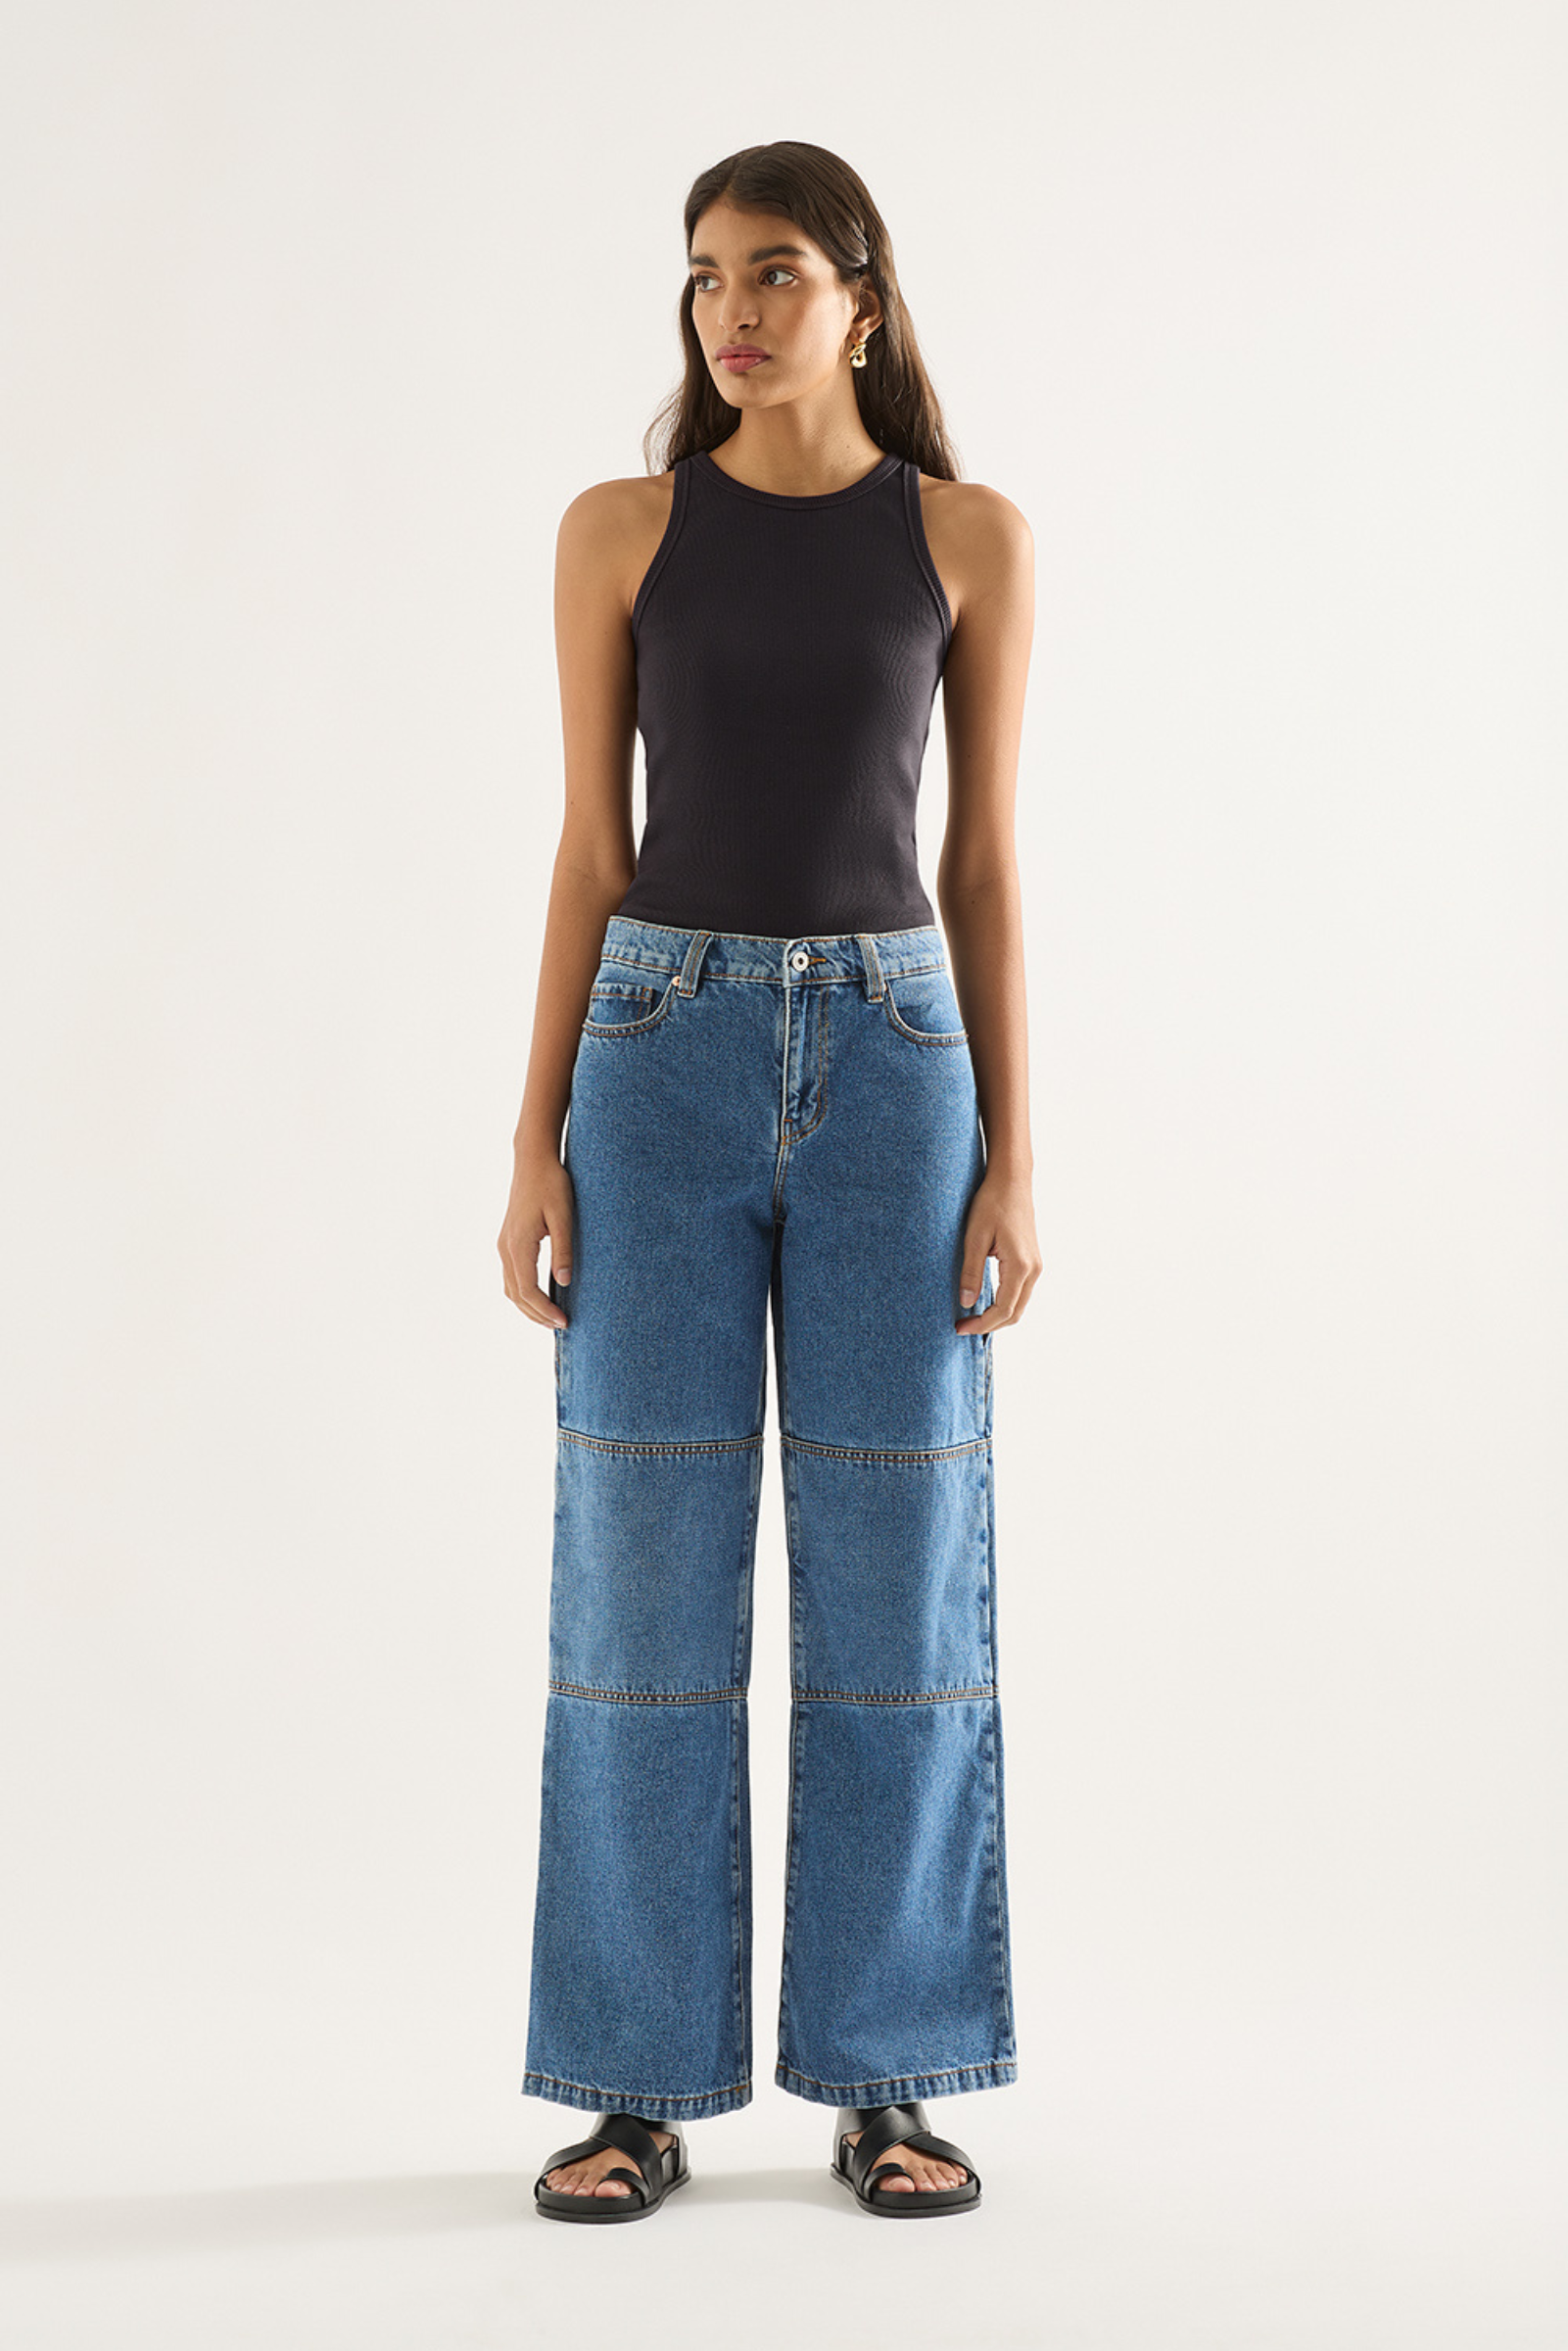 Outland Bianca Jeans - Moment Mid Blue